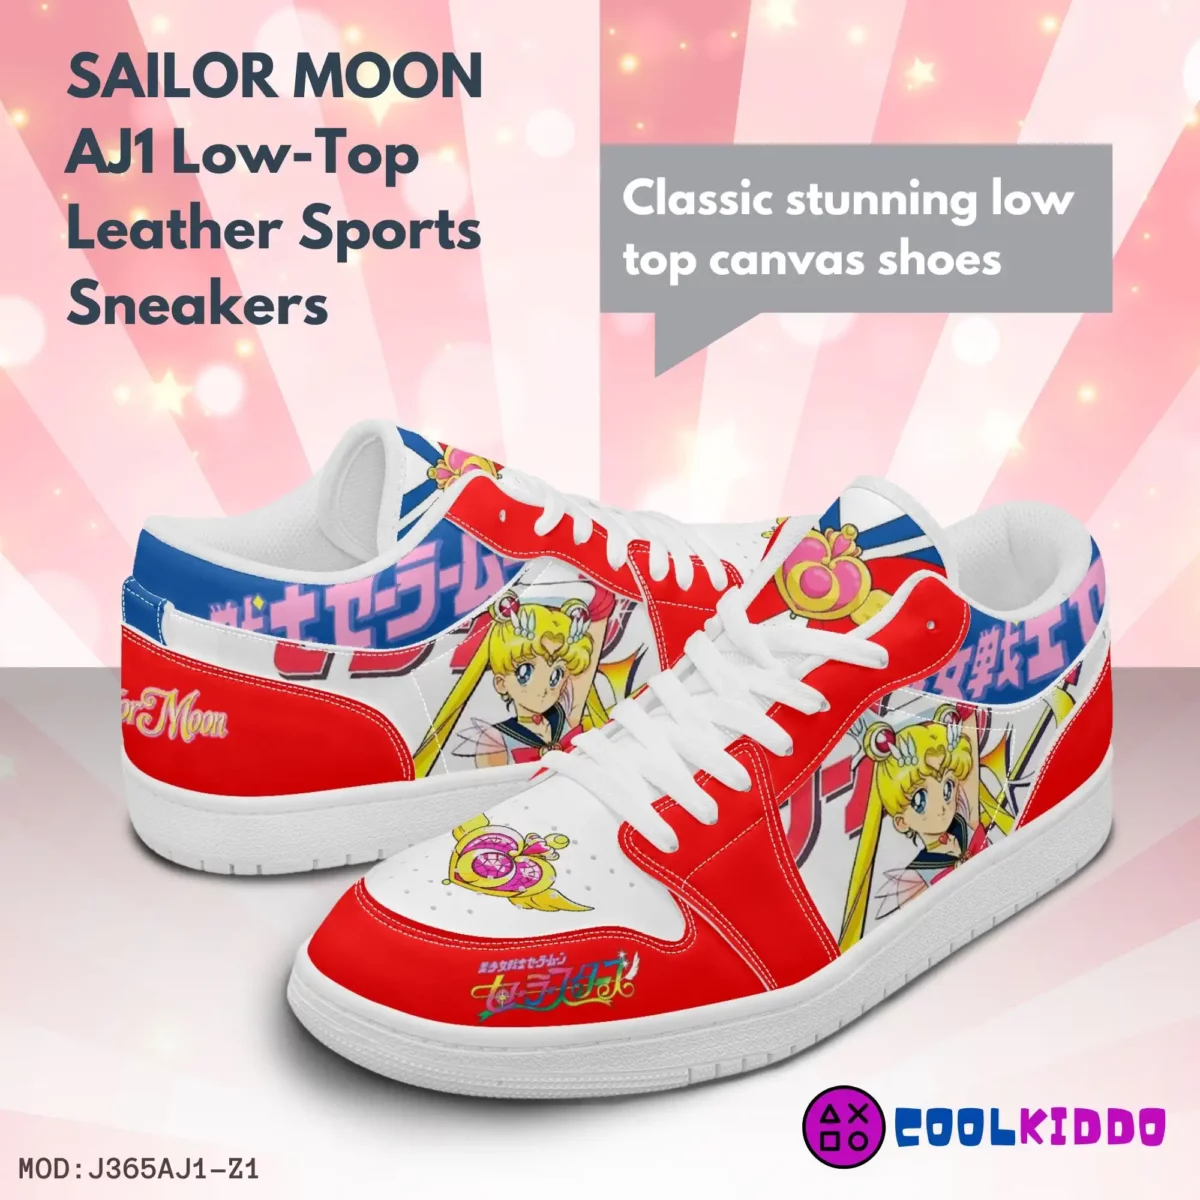 Salior Moon Anime Series Inspired Low-Top Leather Sneakers for youth/adults. Character Print Shoes Cool Kiddo 10